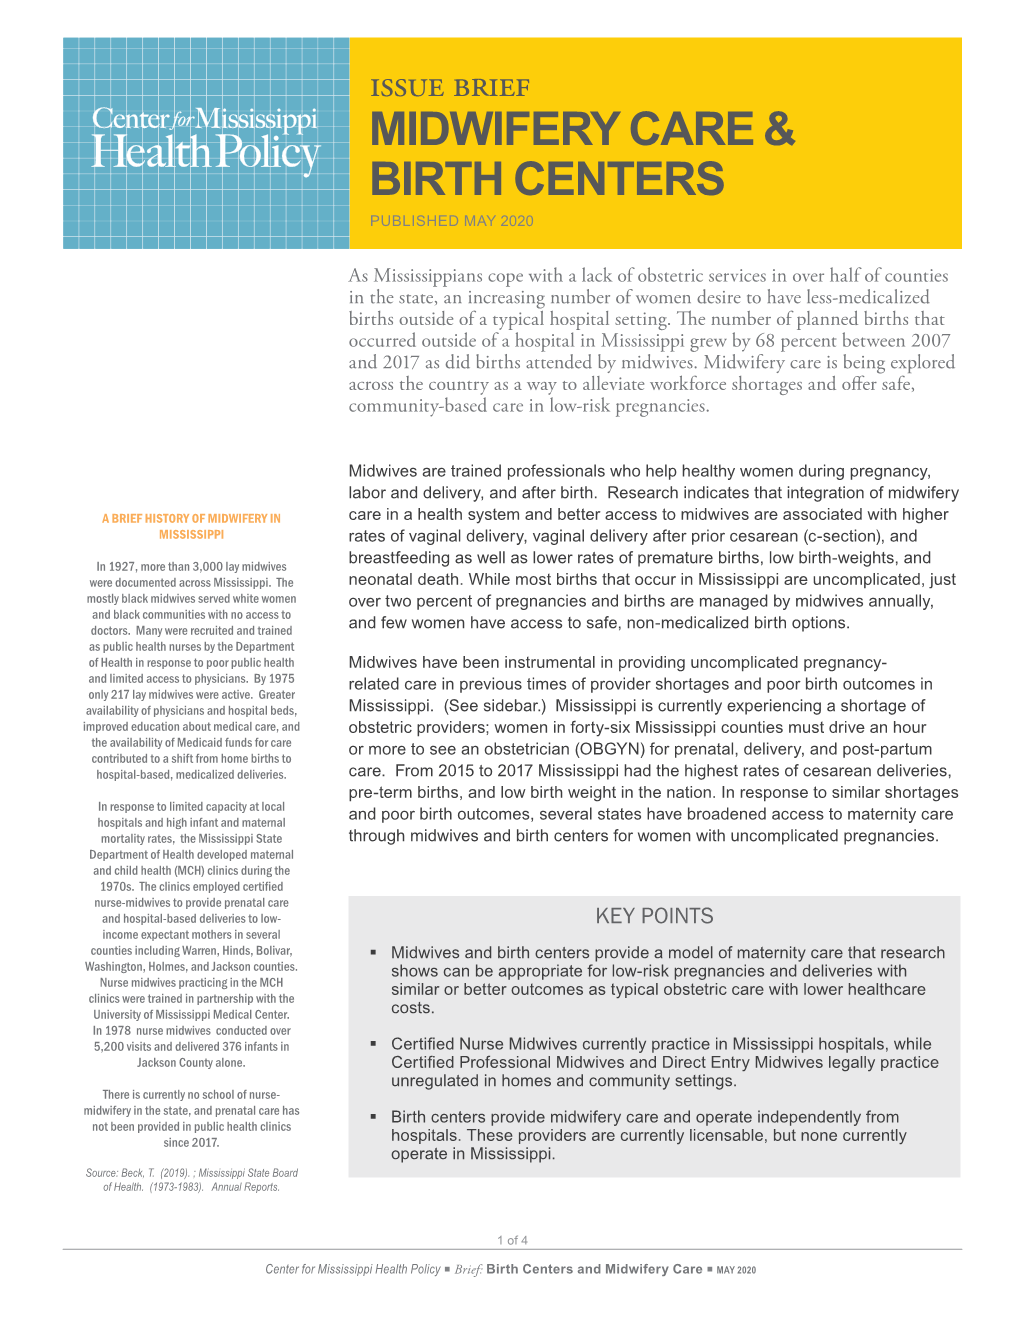 Issue Brief MIDWIFERY CARE & BIRTH CENTERS PUBLISHED MAY 2020